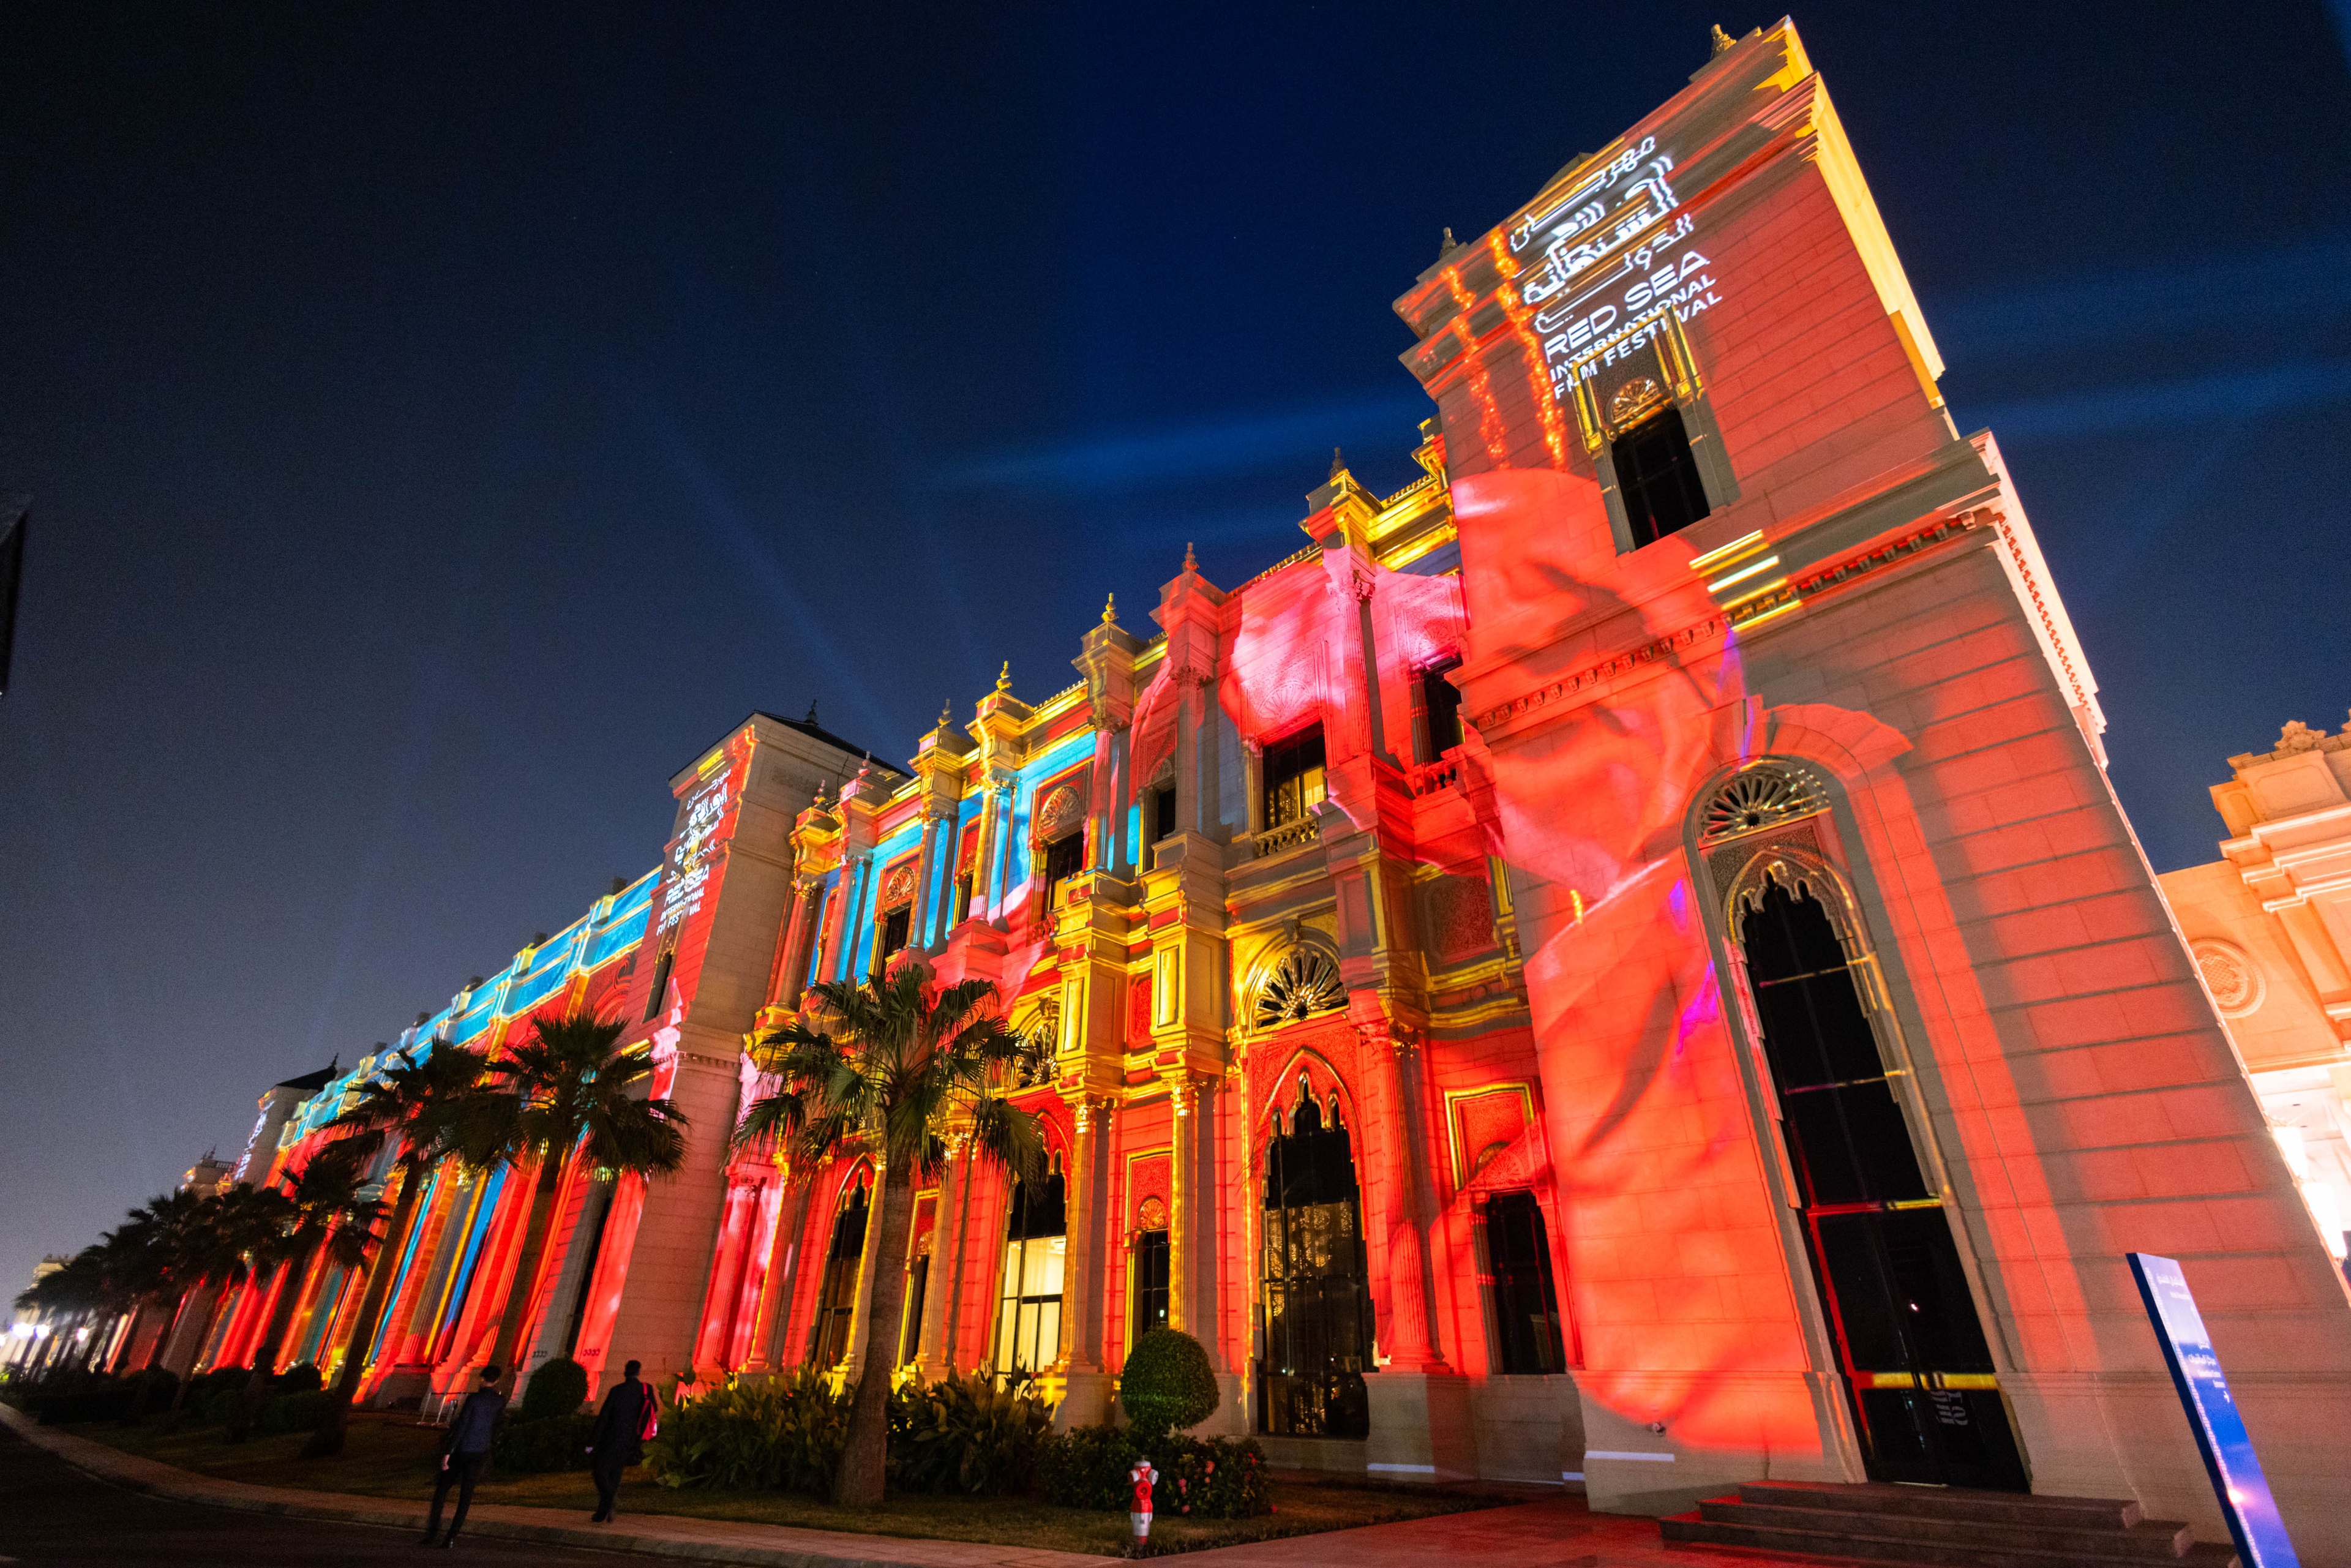 Beige building lit up peach and blue with palm trees out front